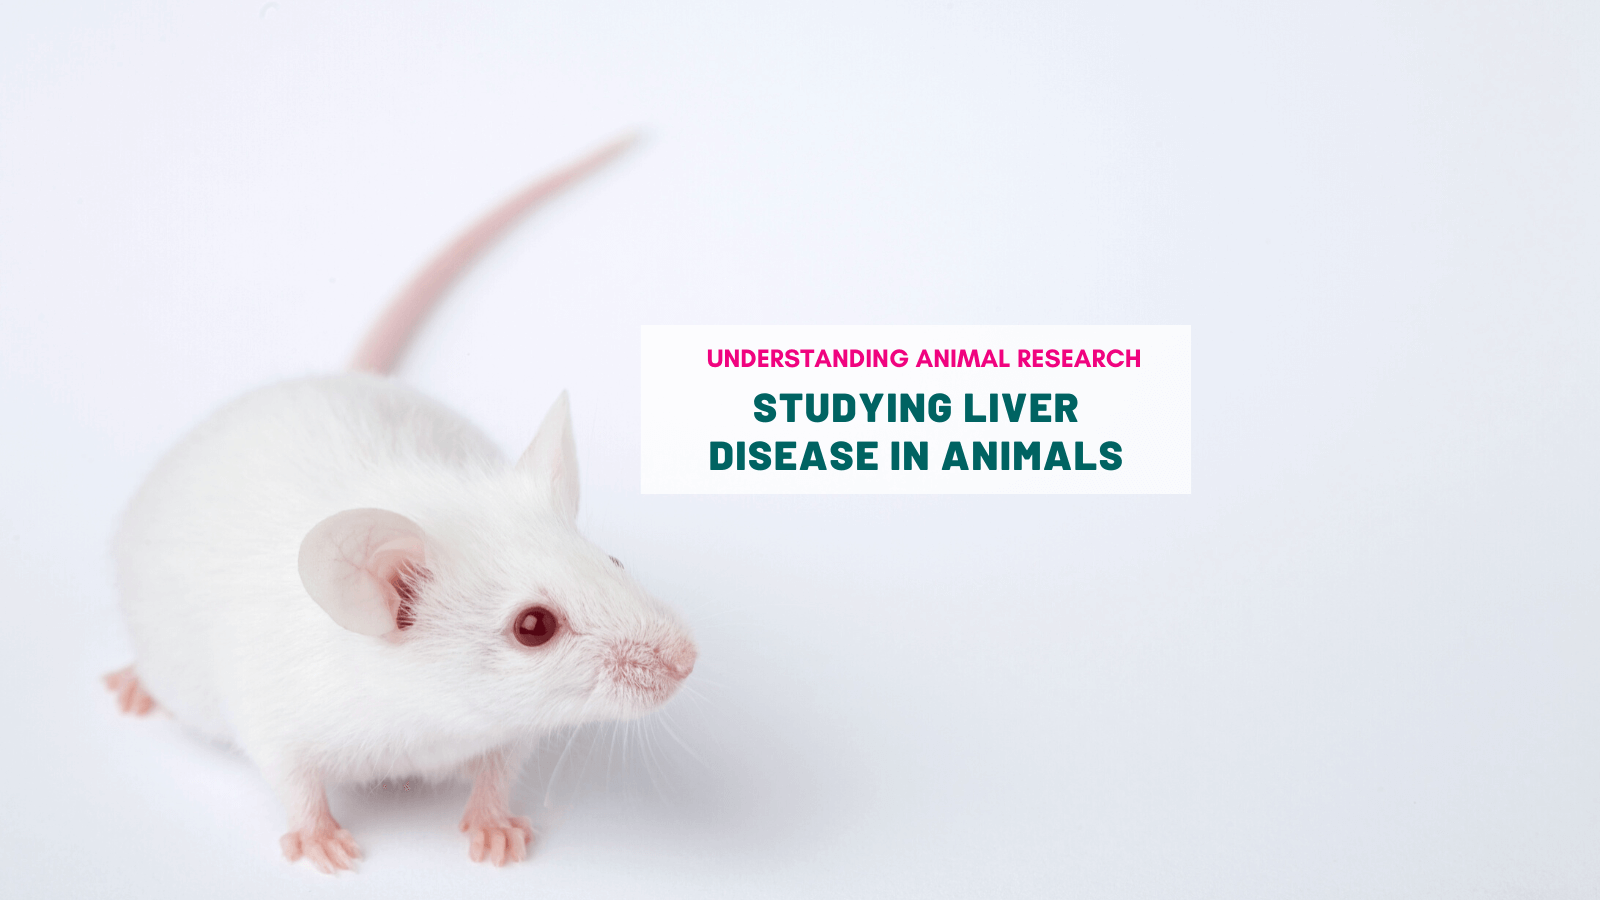 Studying liver disease in animals